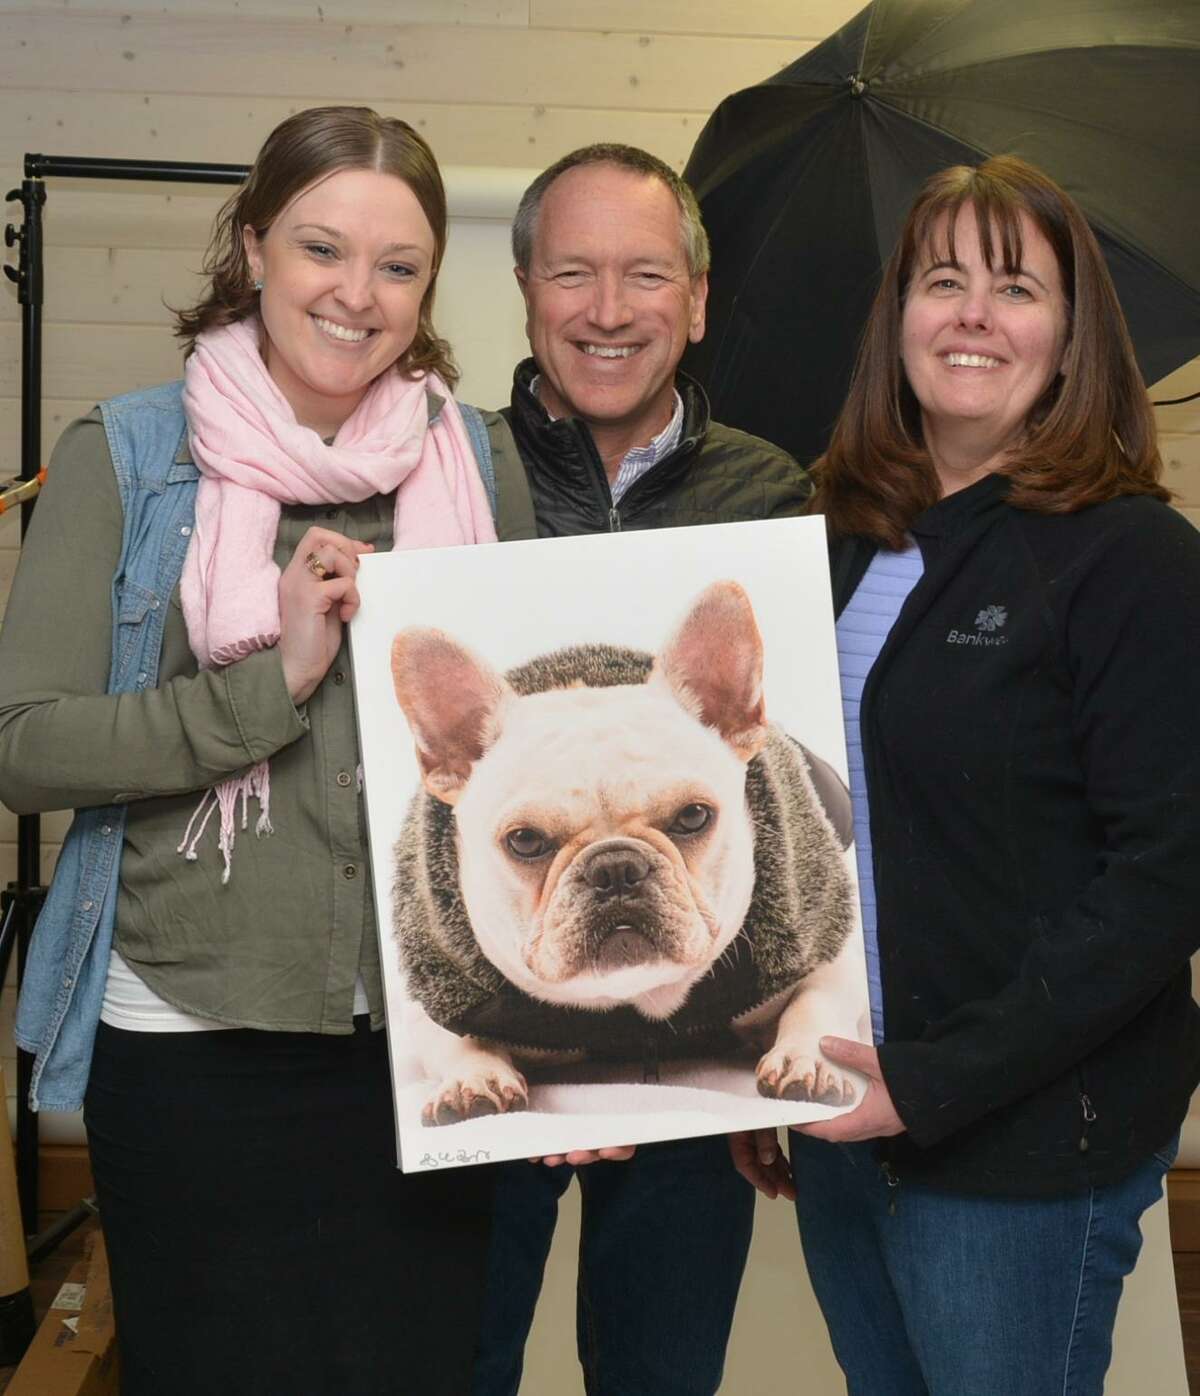 Bankwell Marketing Assistant Lucy French, photographer Mike Bagley and Ann Mitrione, Bankwell in Wilton branch manager, pose with a photo of a dog seeking adoption.